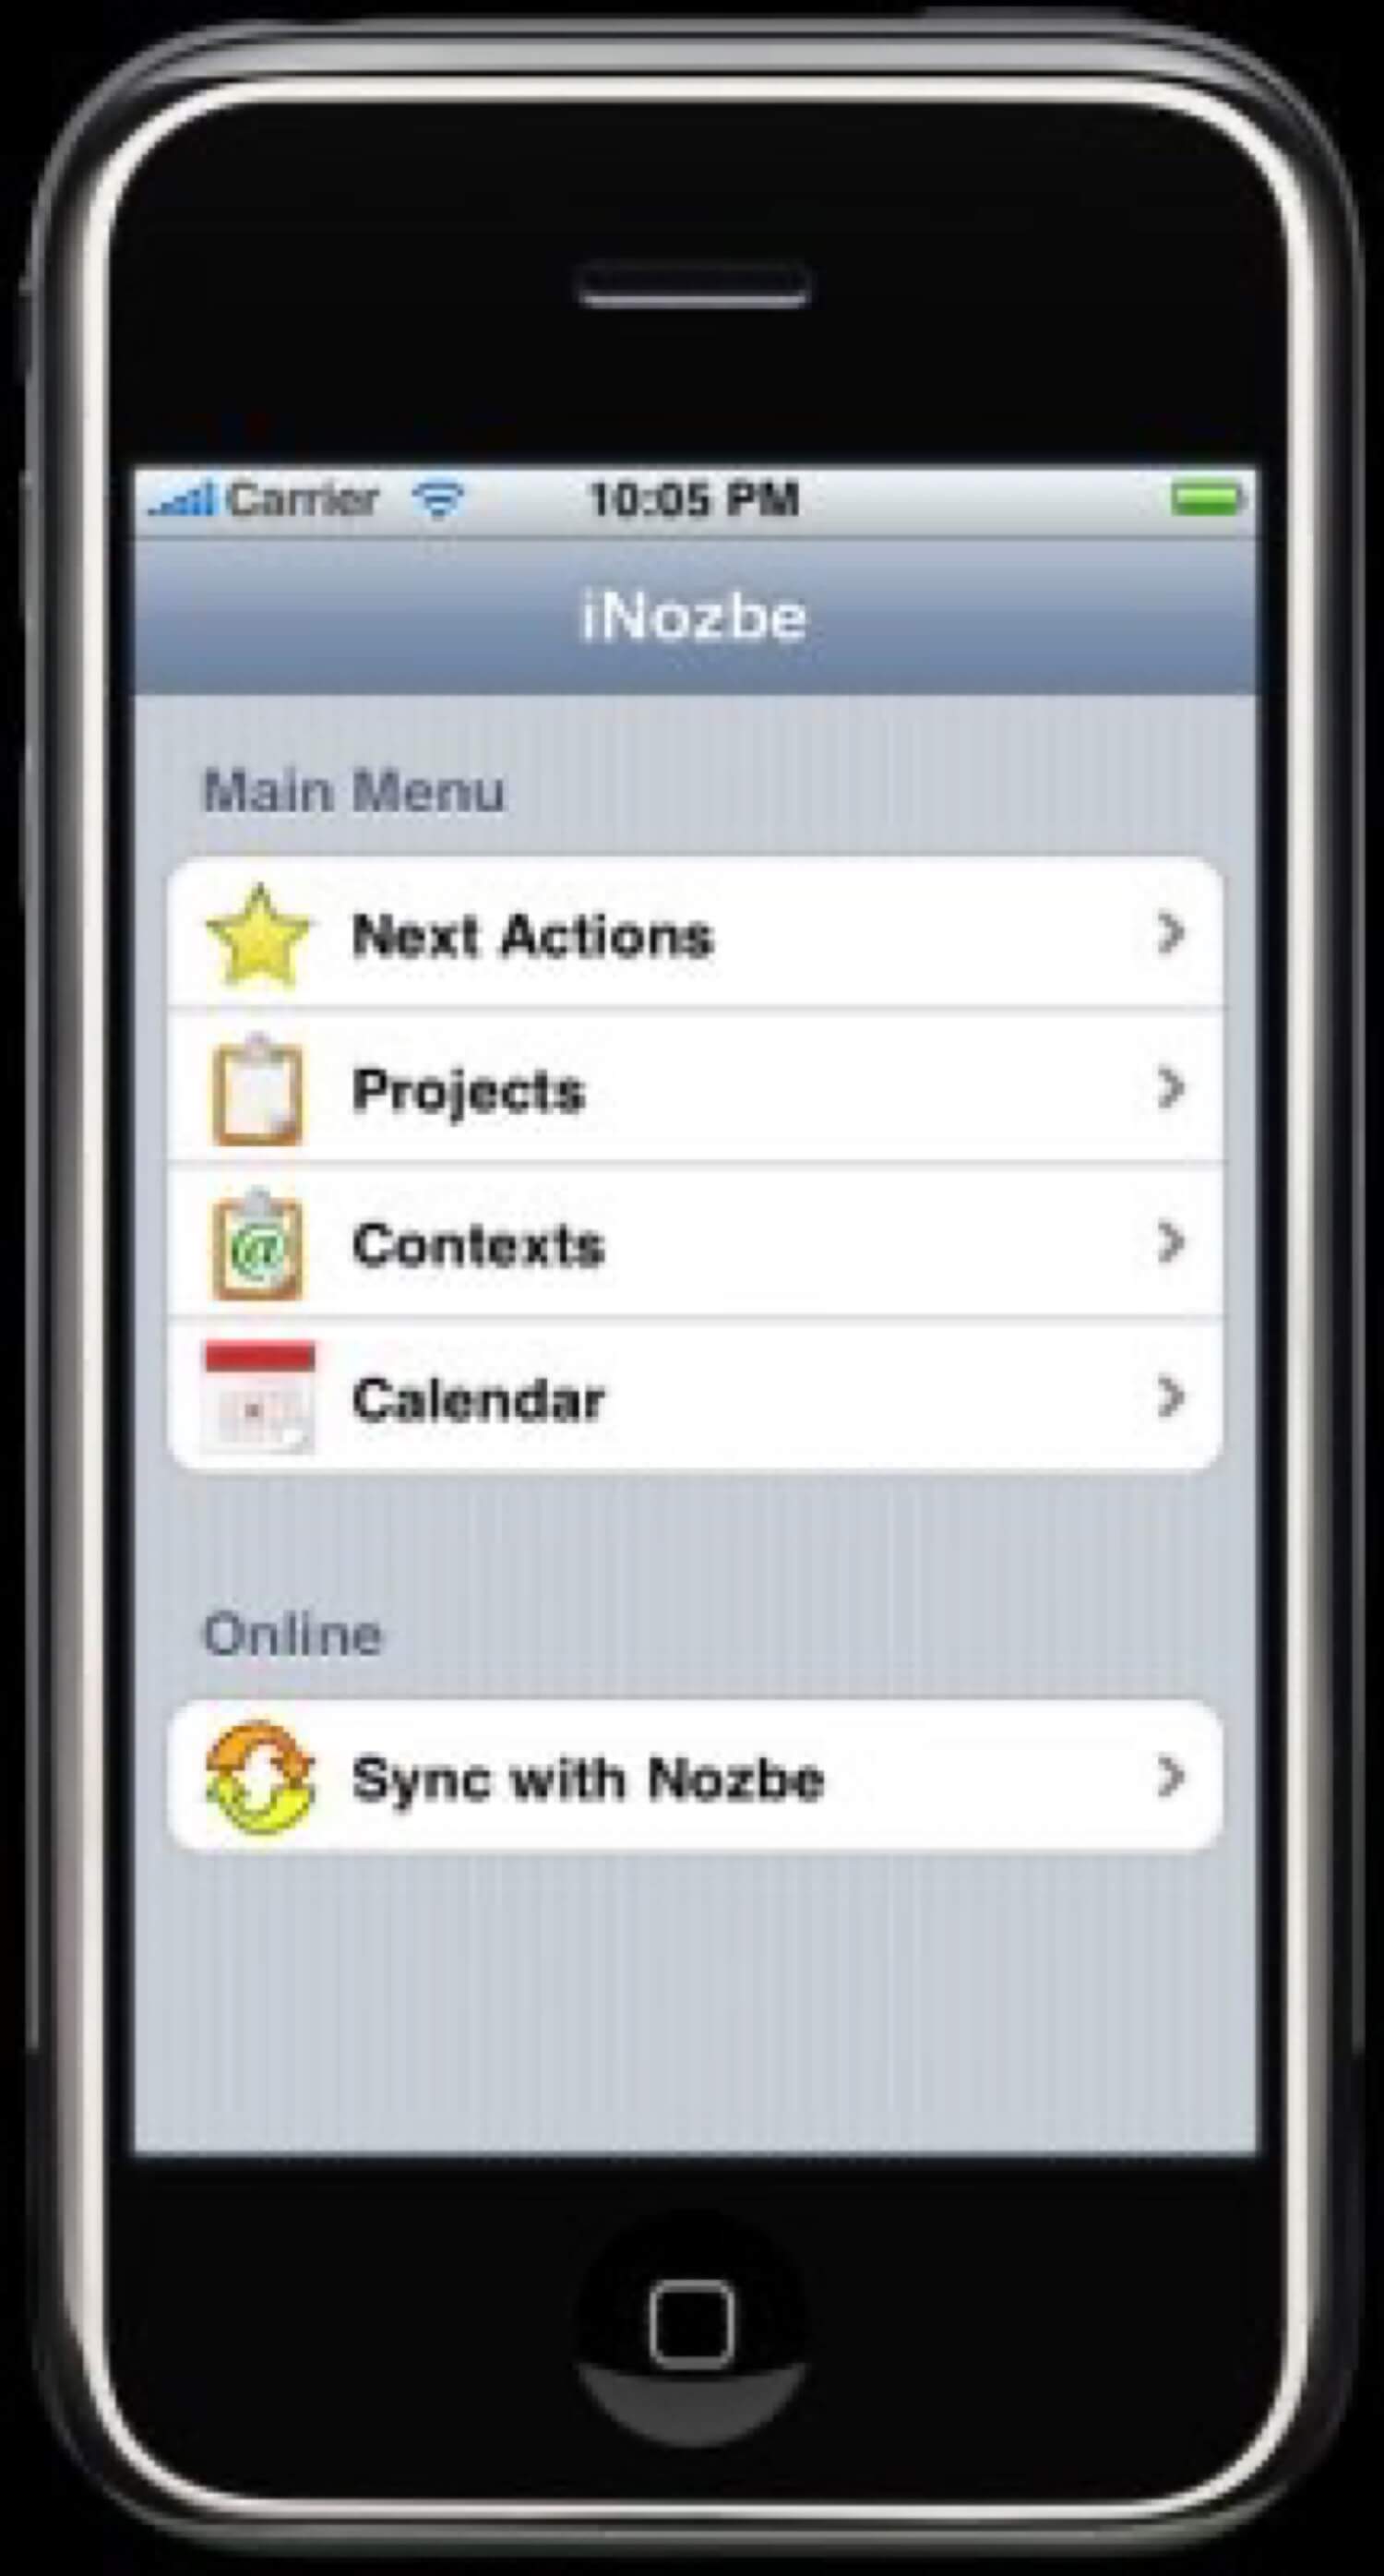 Preview of the new iNozbe - native iPhone app